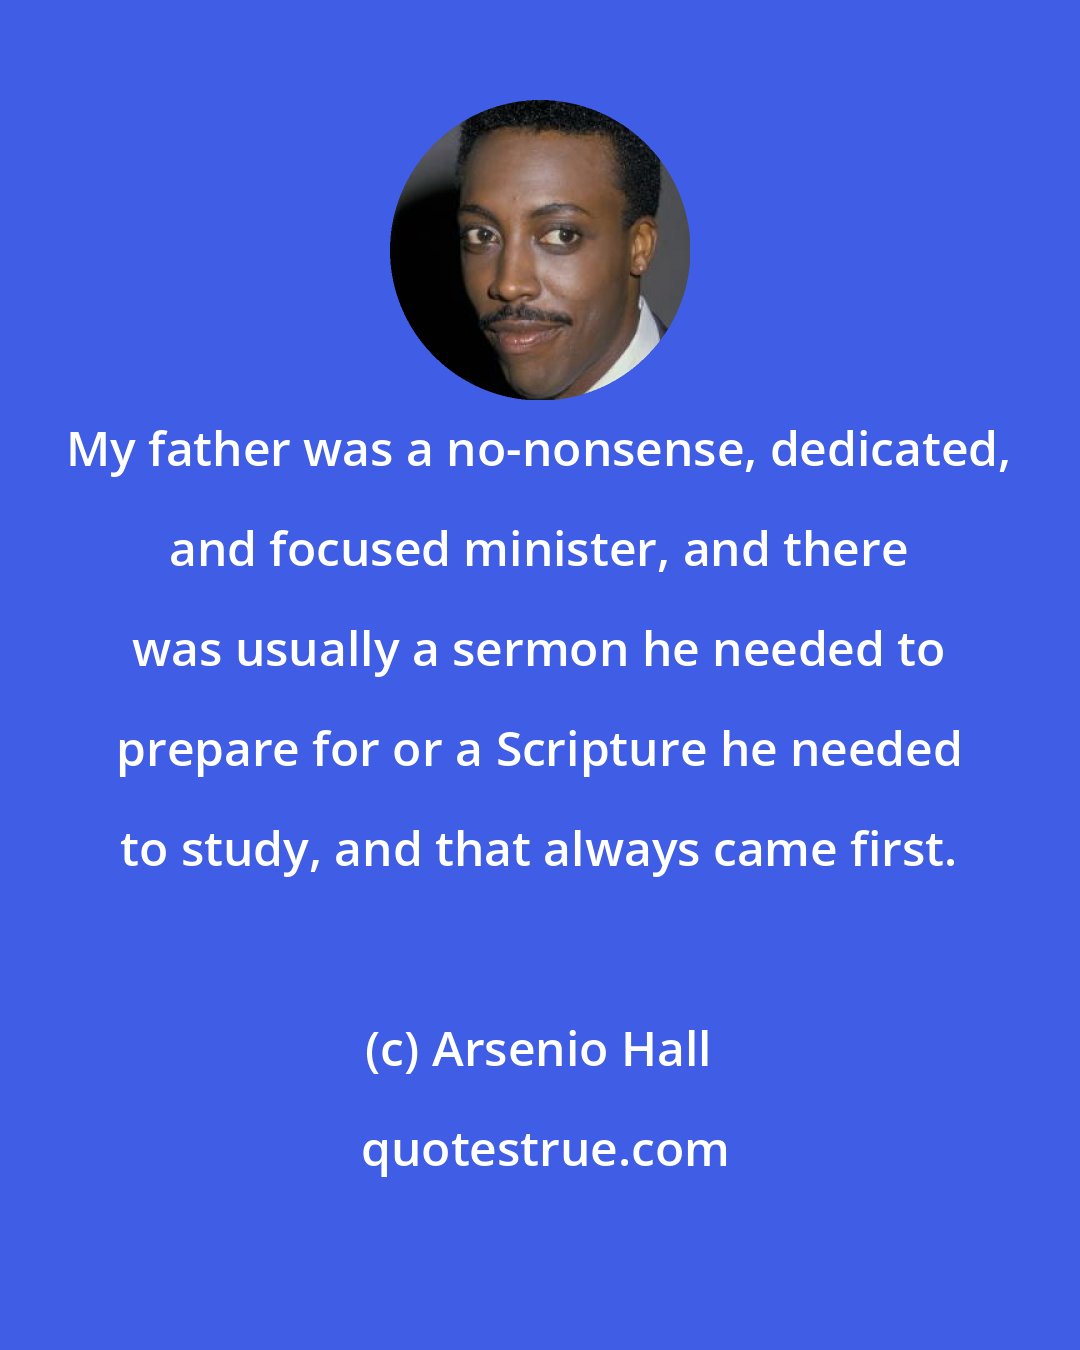 Arsenio Hall: My father was a no-nonsense, dedicated, and focused minister, and there was usually a sermon he needed to prepare for or a Scripture he needed to study, and that always came first.